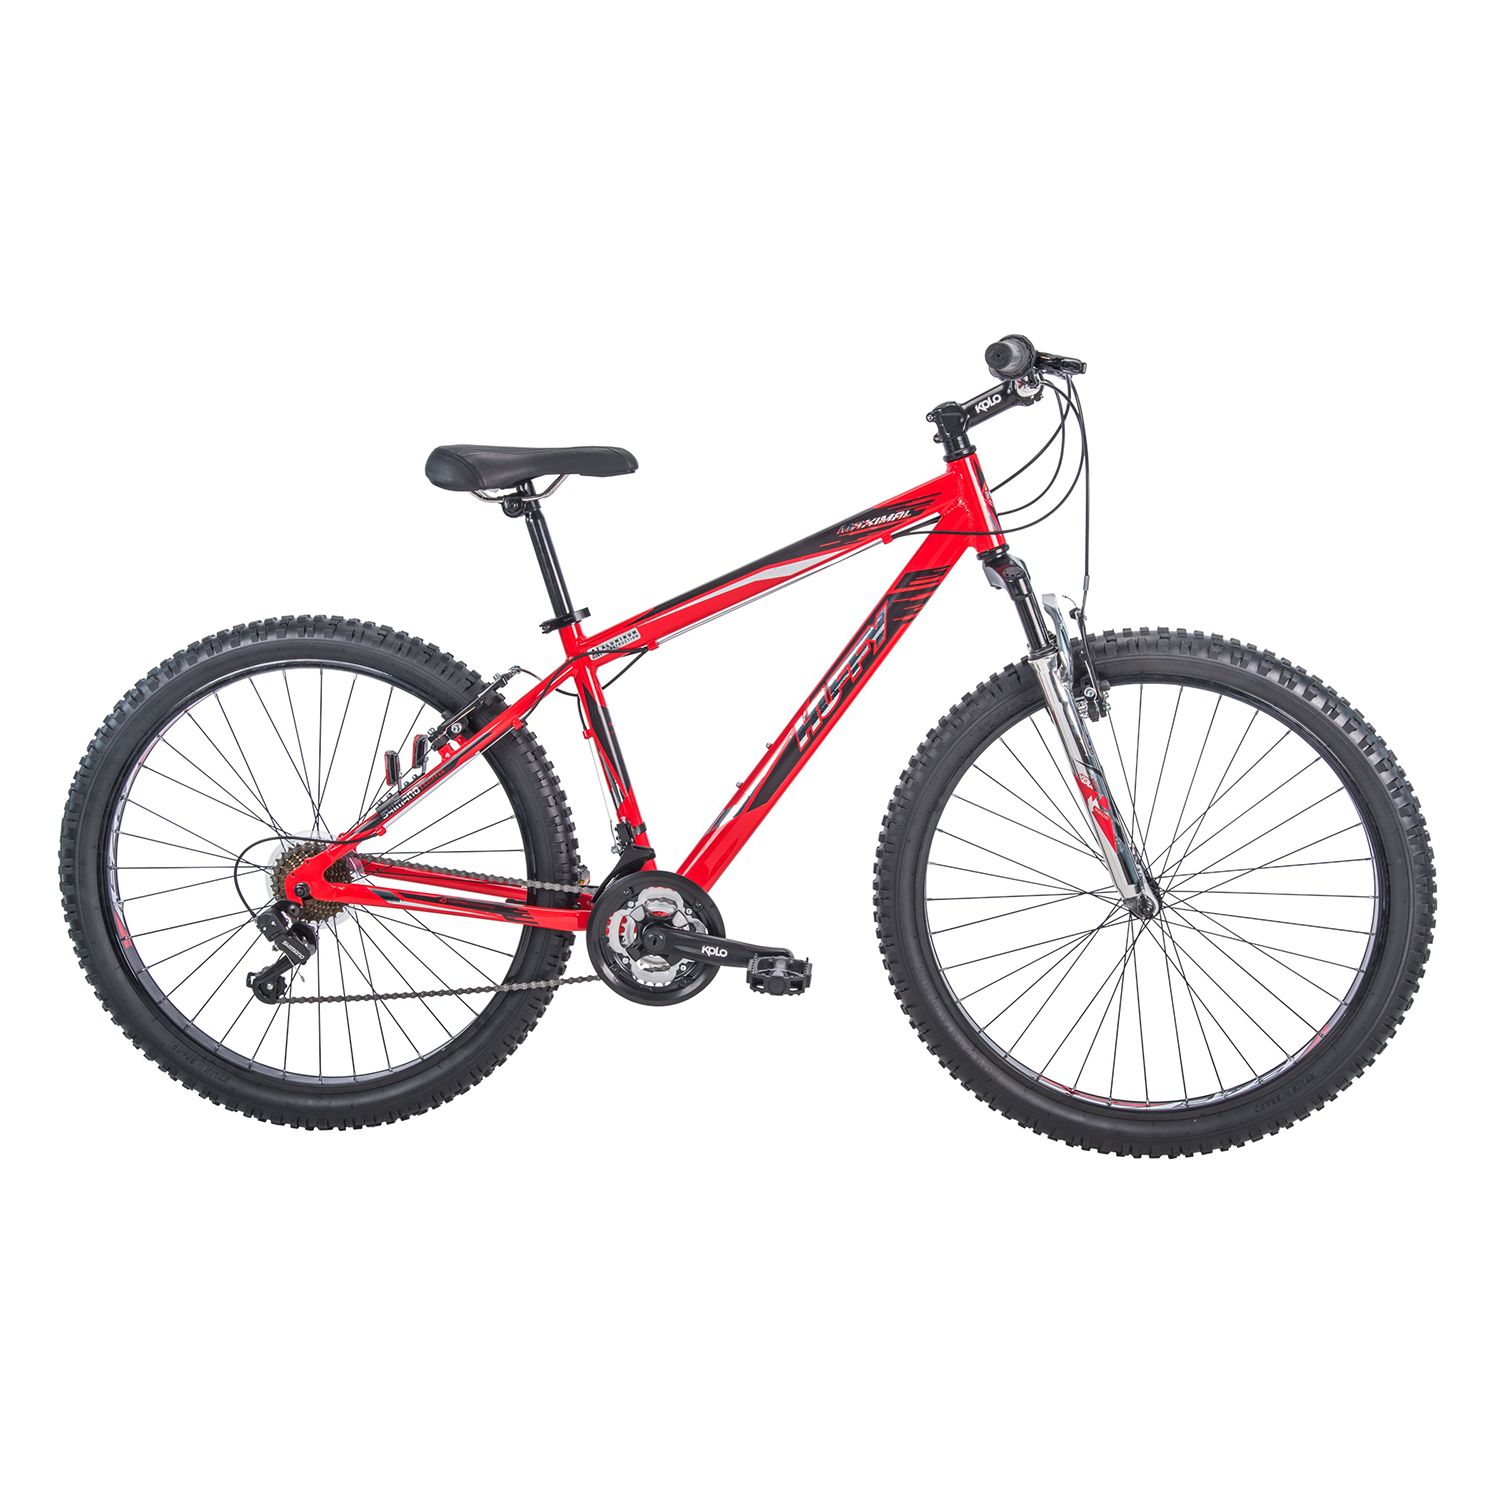 Huffy 53920 76 inch Mountain Bike for sale online 